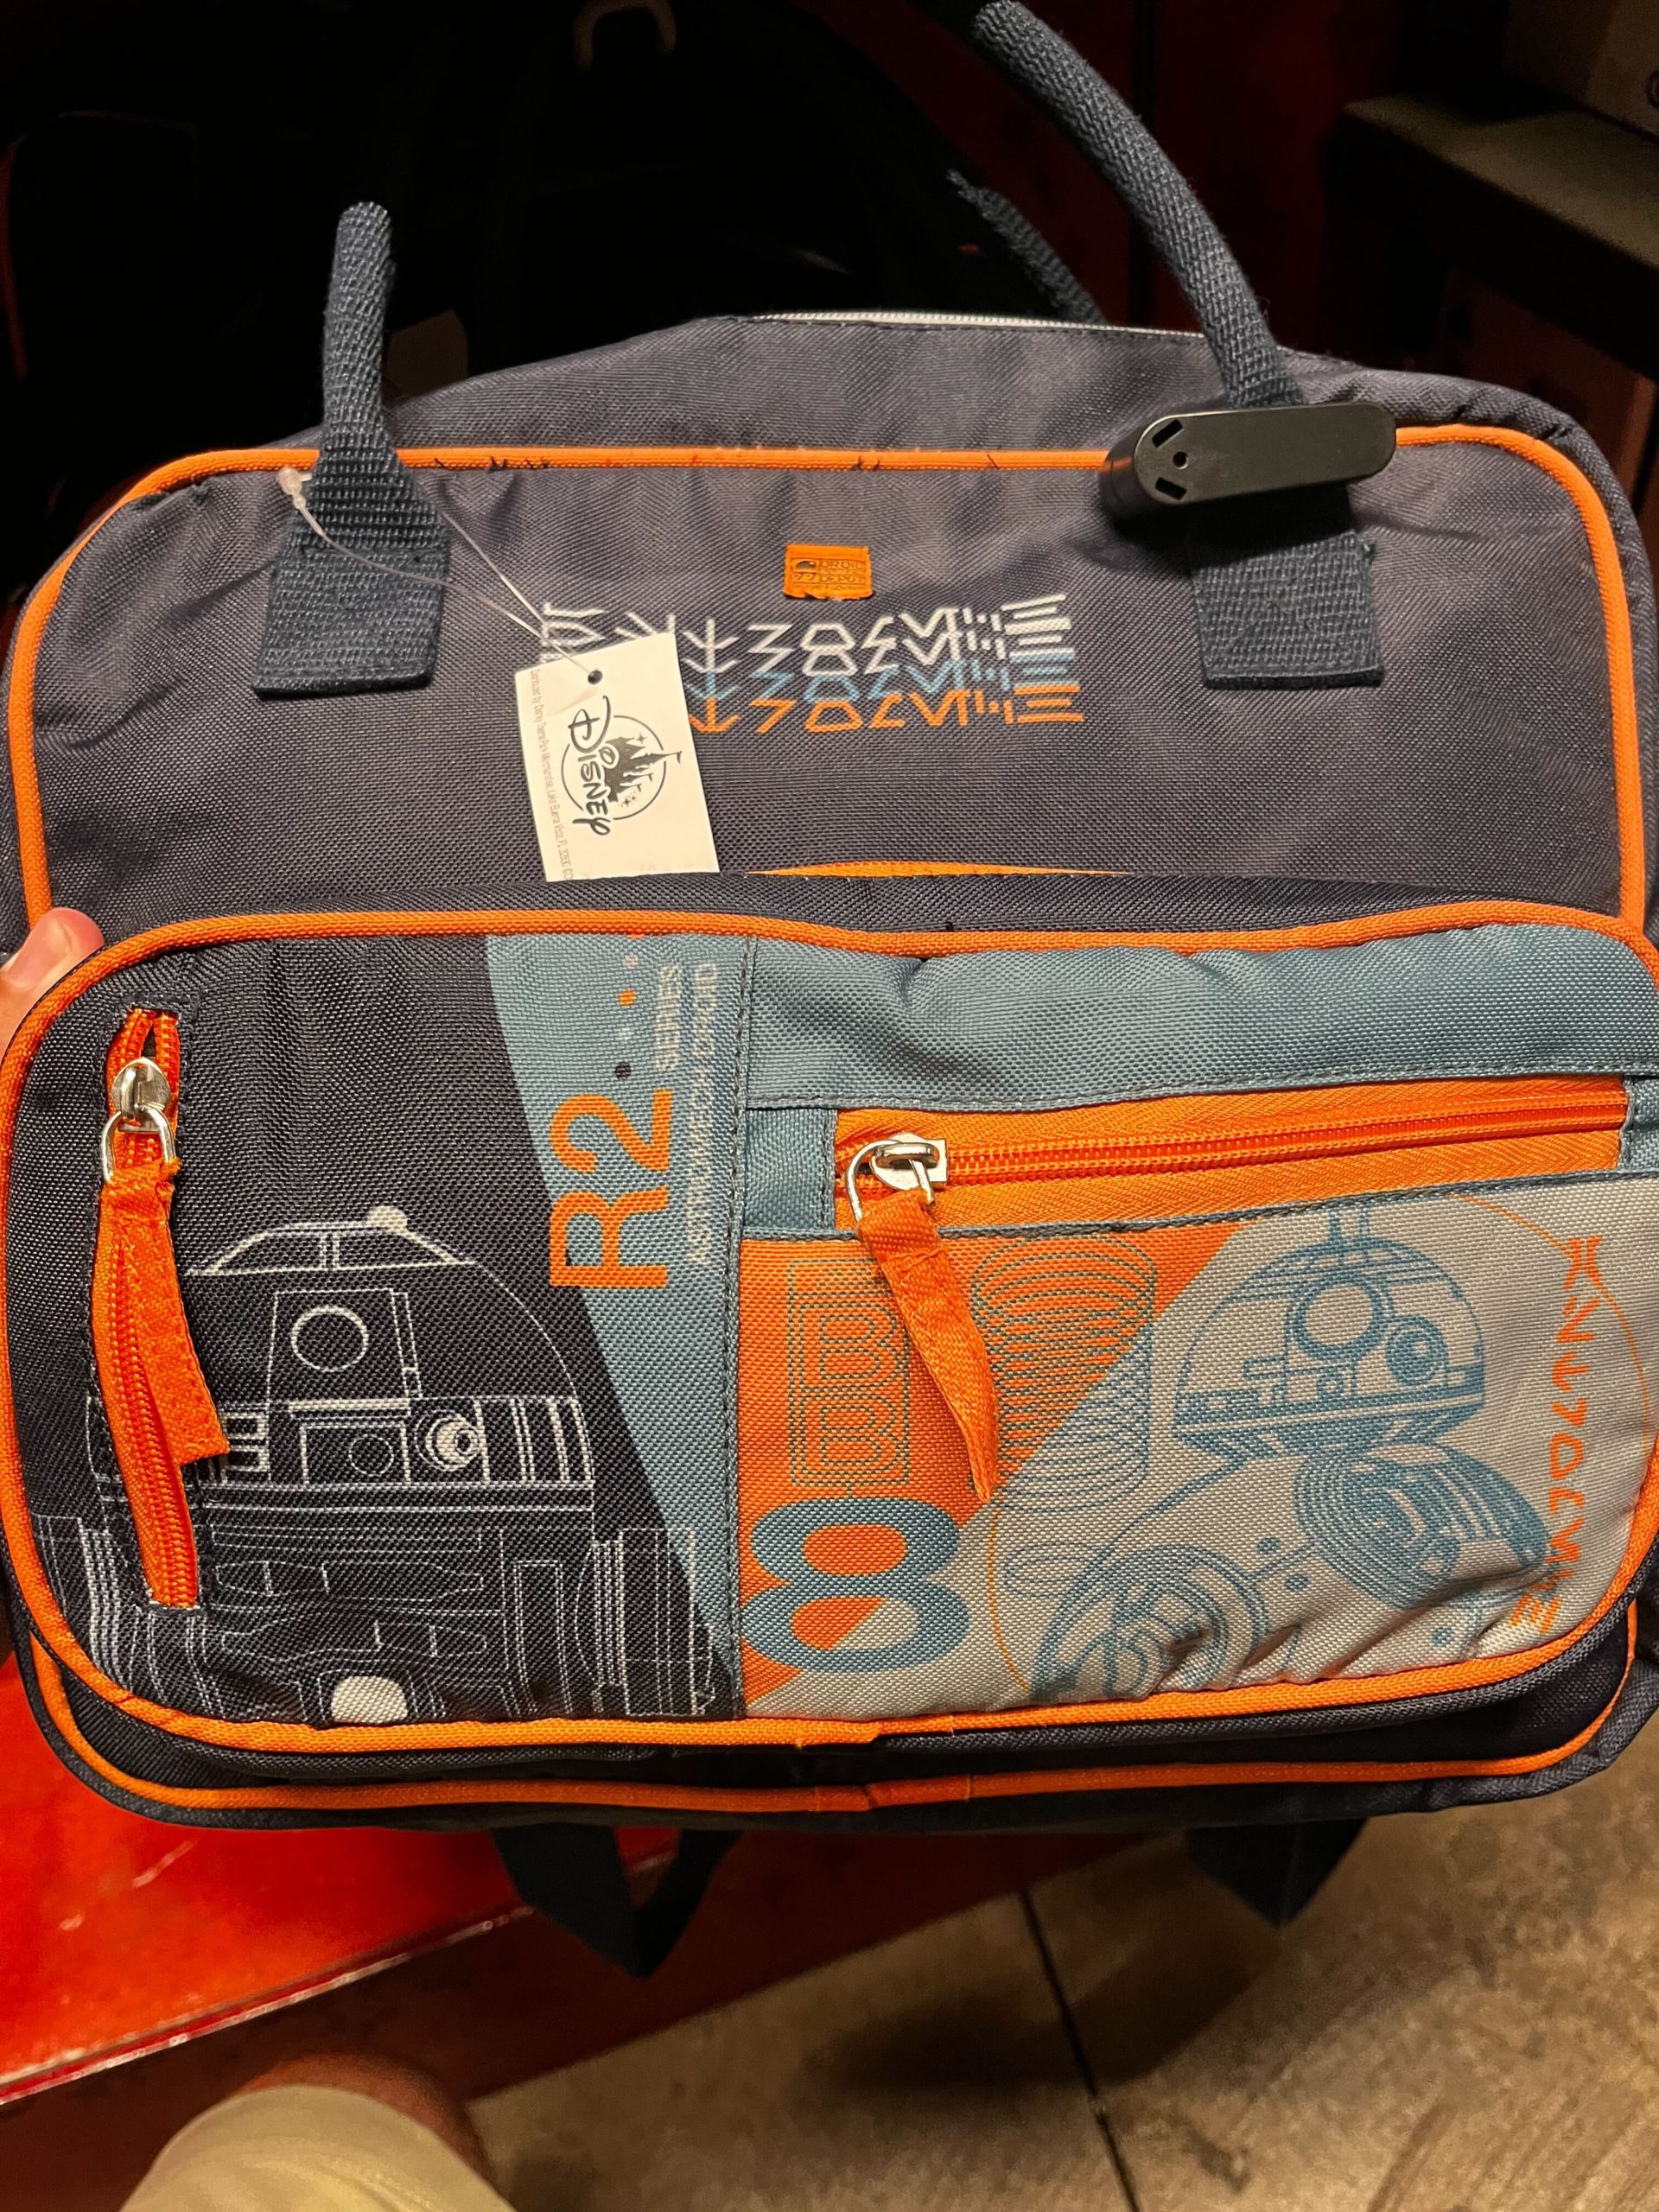 New Protective Droid Bags Roll Into Droid Depot - MickeyBlog.com